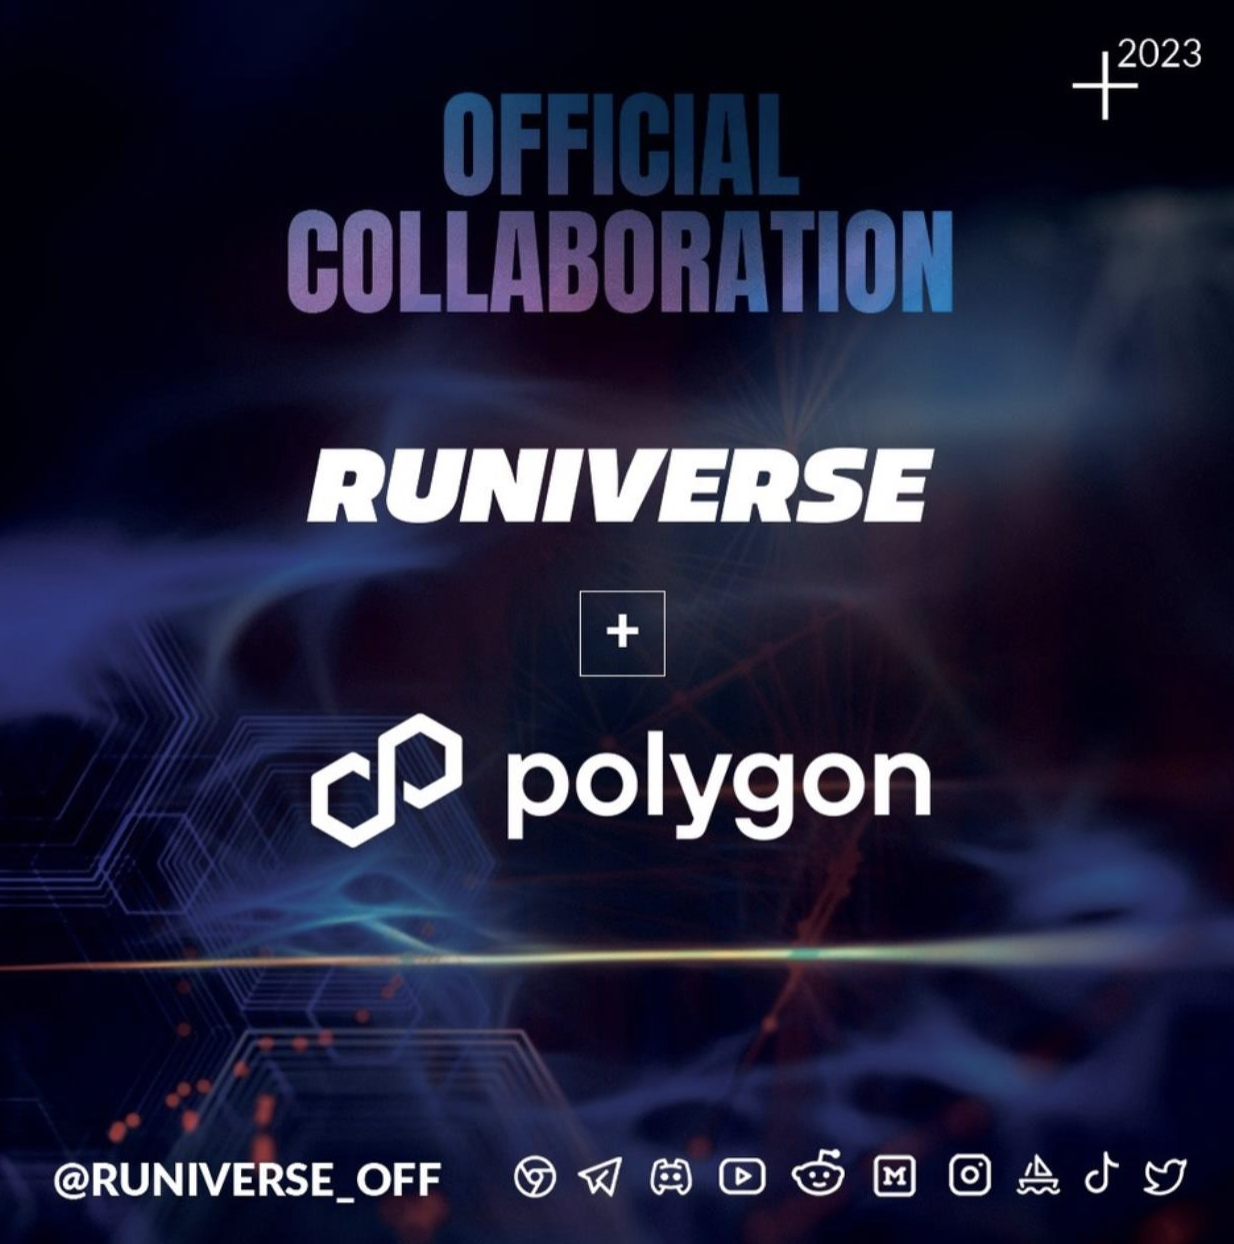 Leading metaverse game, Runiverse, announces collaboration with Polygon